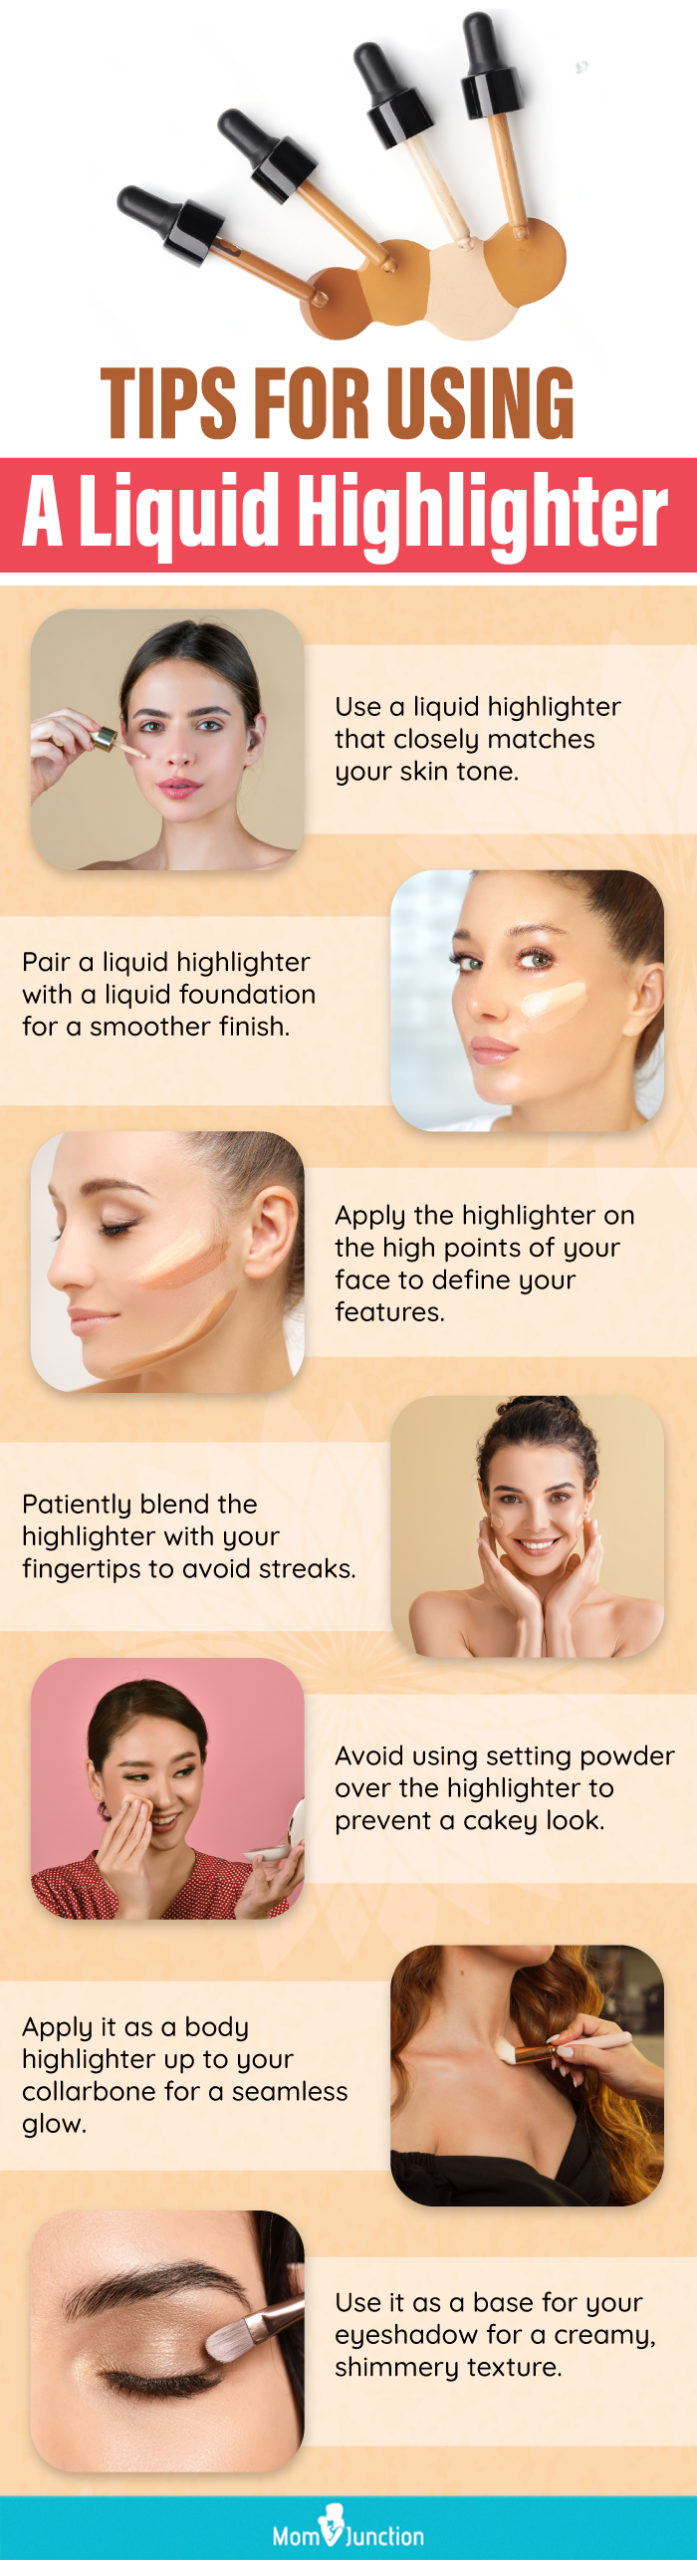 Tips For Using A Liquid Highlighter(infographic)